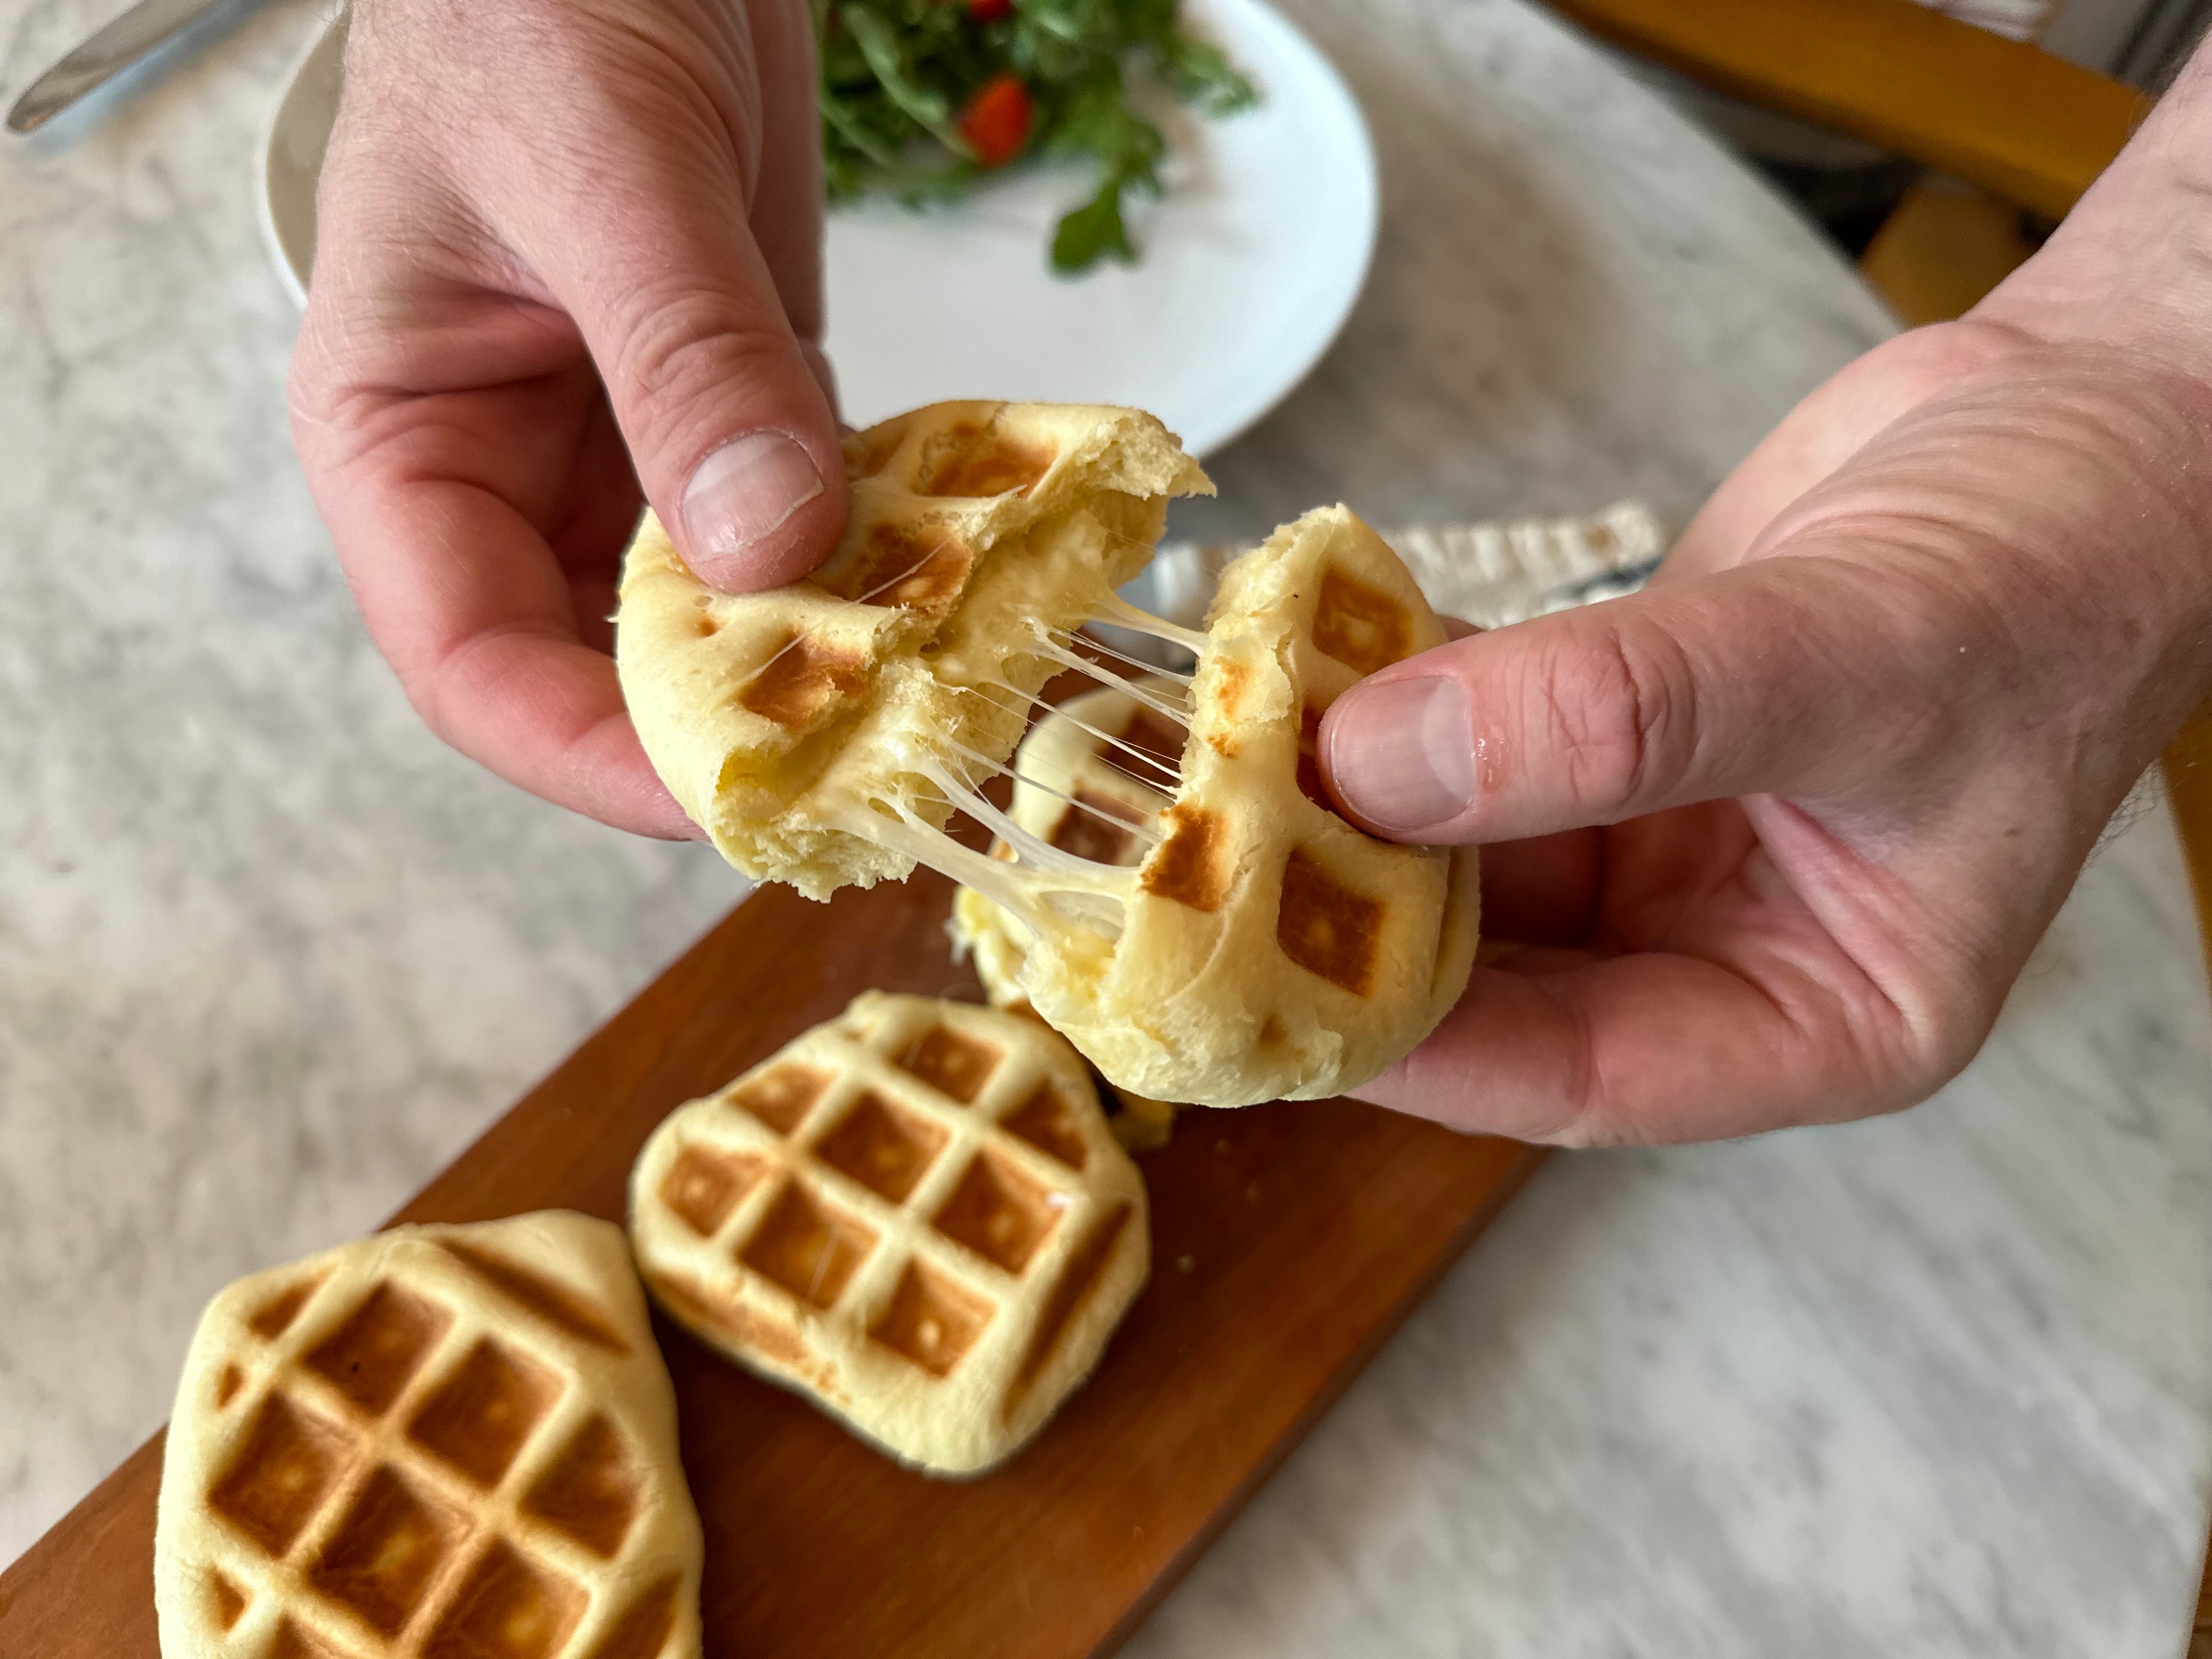 Cheesy waffles stuffed with raclette cheese